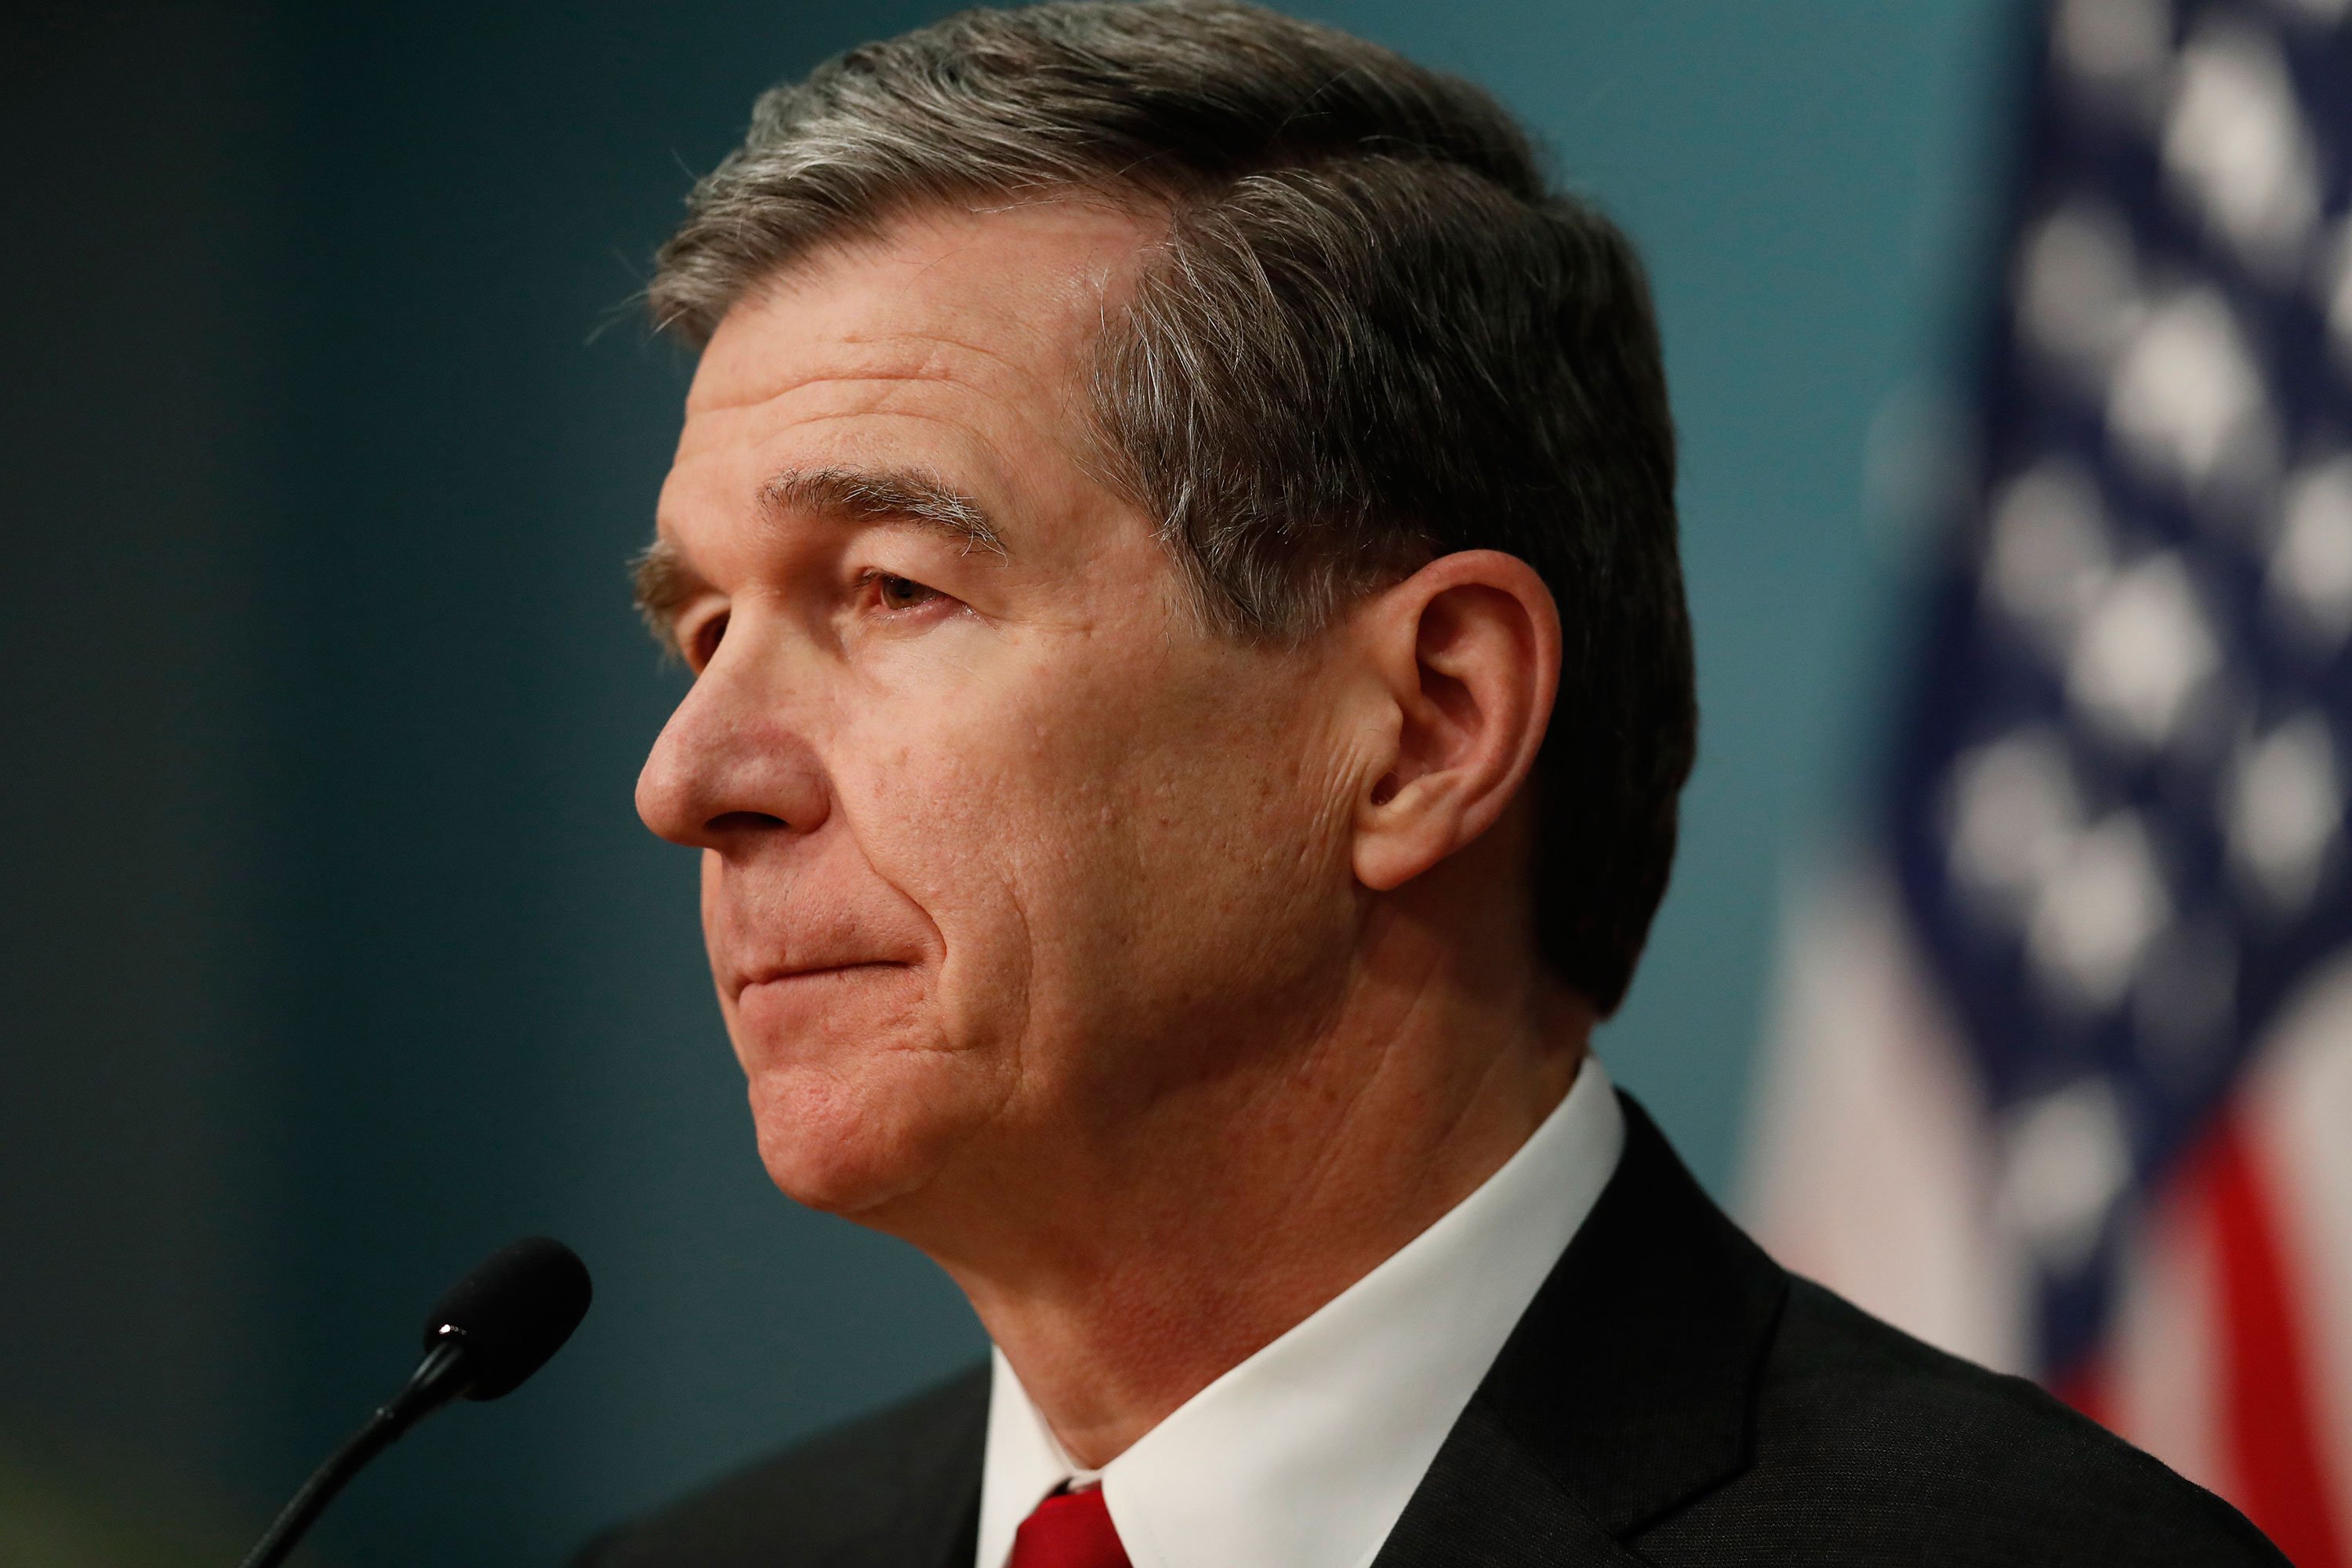 Gov. Roy Cooper gives an update on the state's response to coronavirus in Raleigh, North Carolina on March 31.